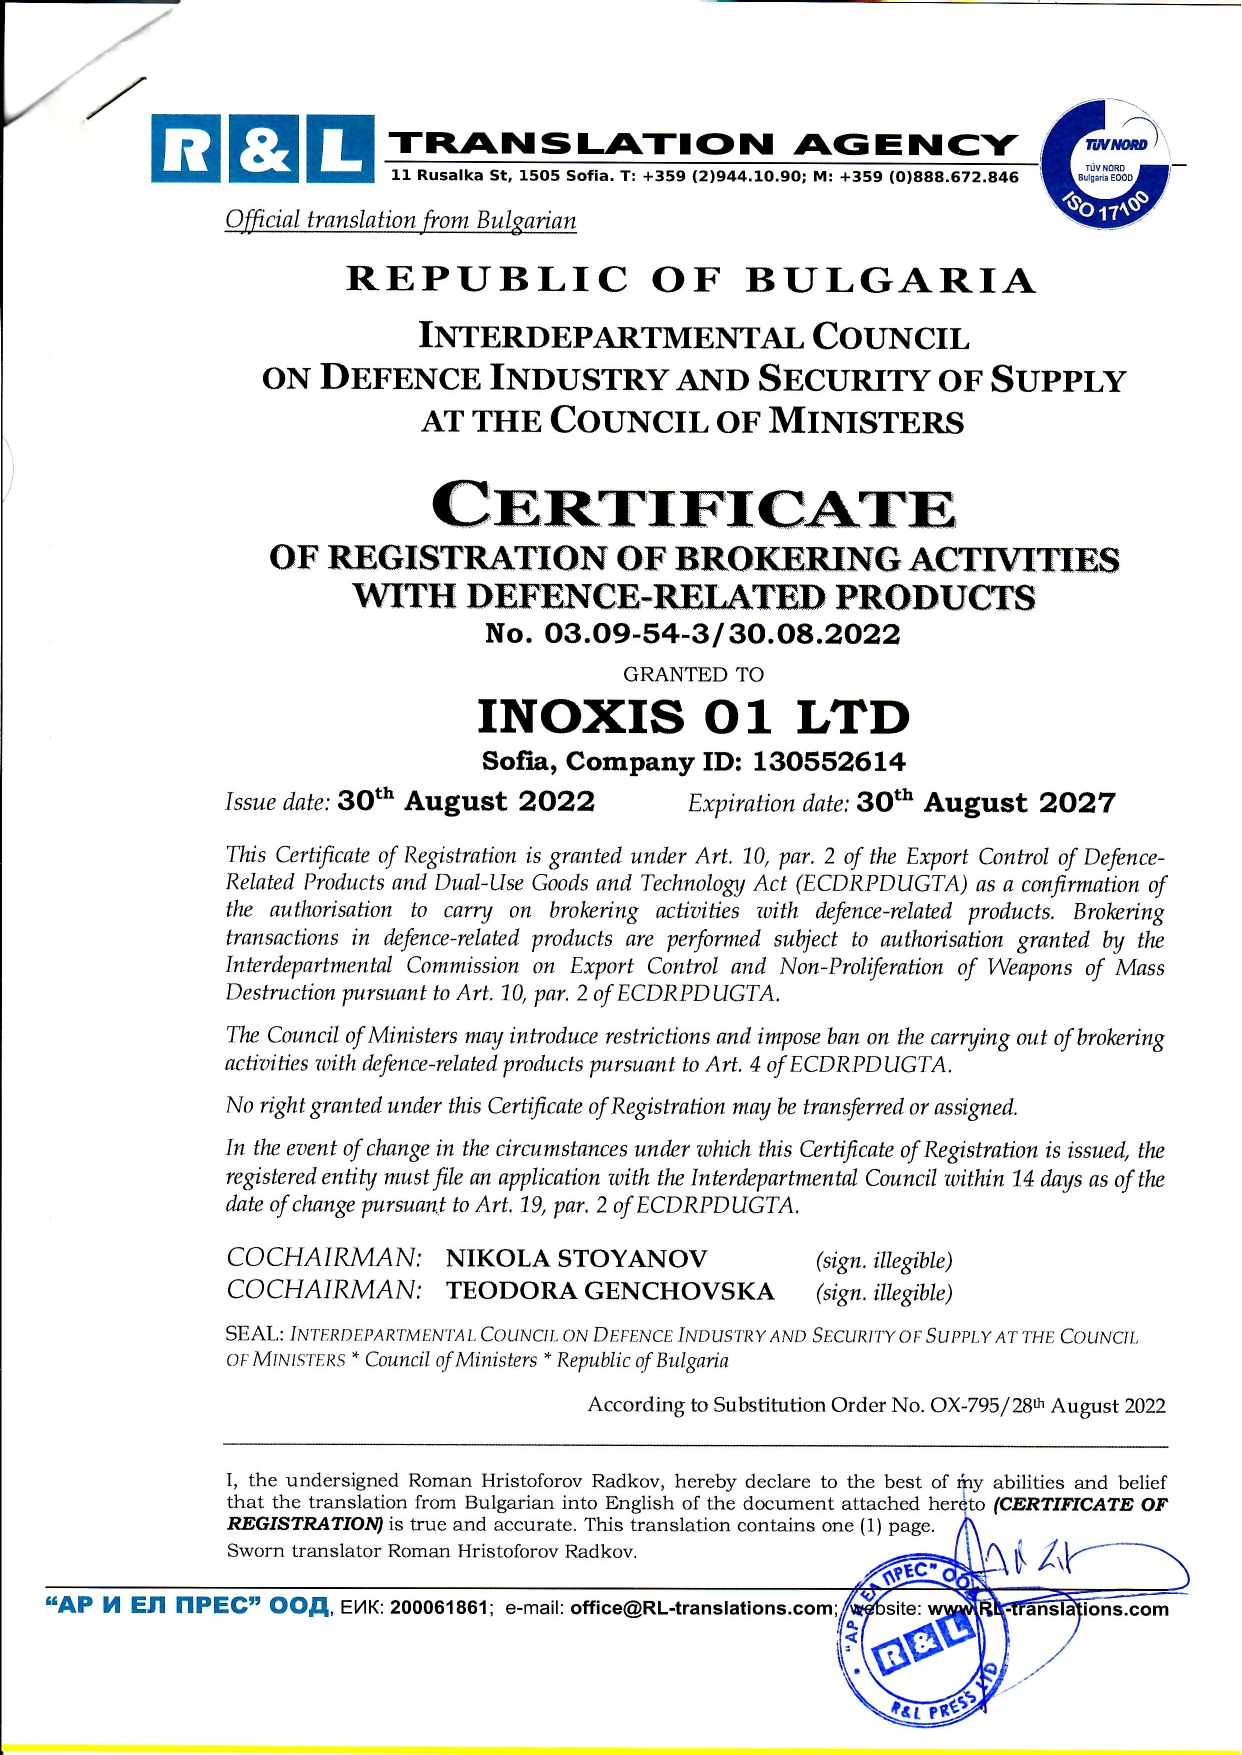 857-certificate-of-brokering-activities-with-defence-related-products-inoxis-01-ltd.jpg